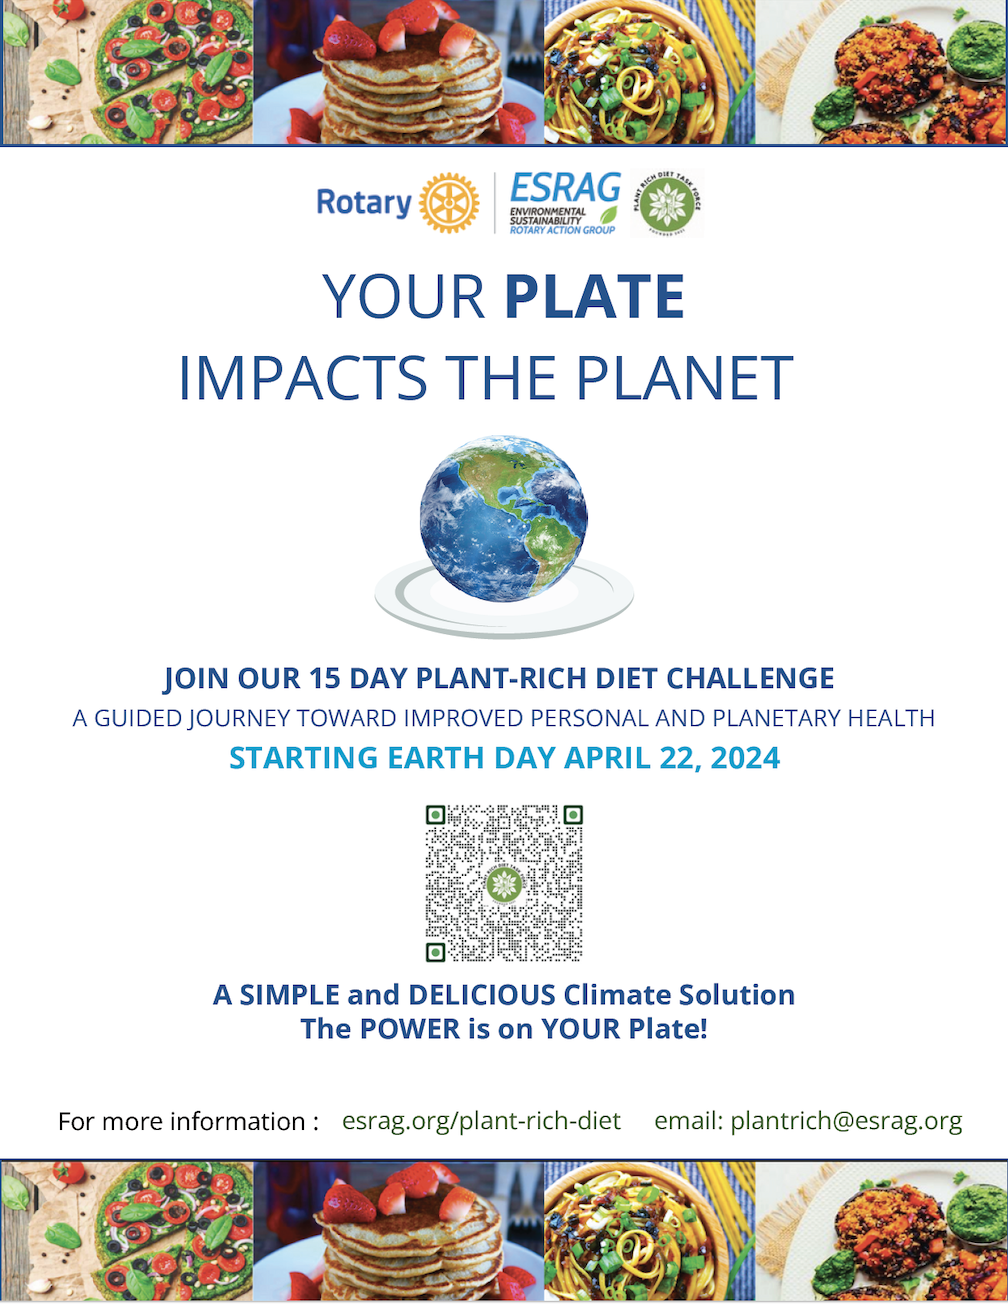 Start your 15-Day Plant-Rich Diet Challenge this Earth Day!